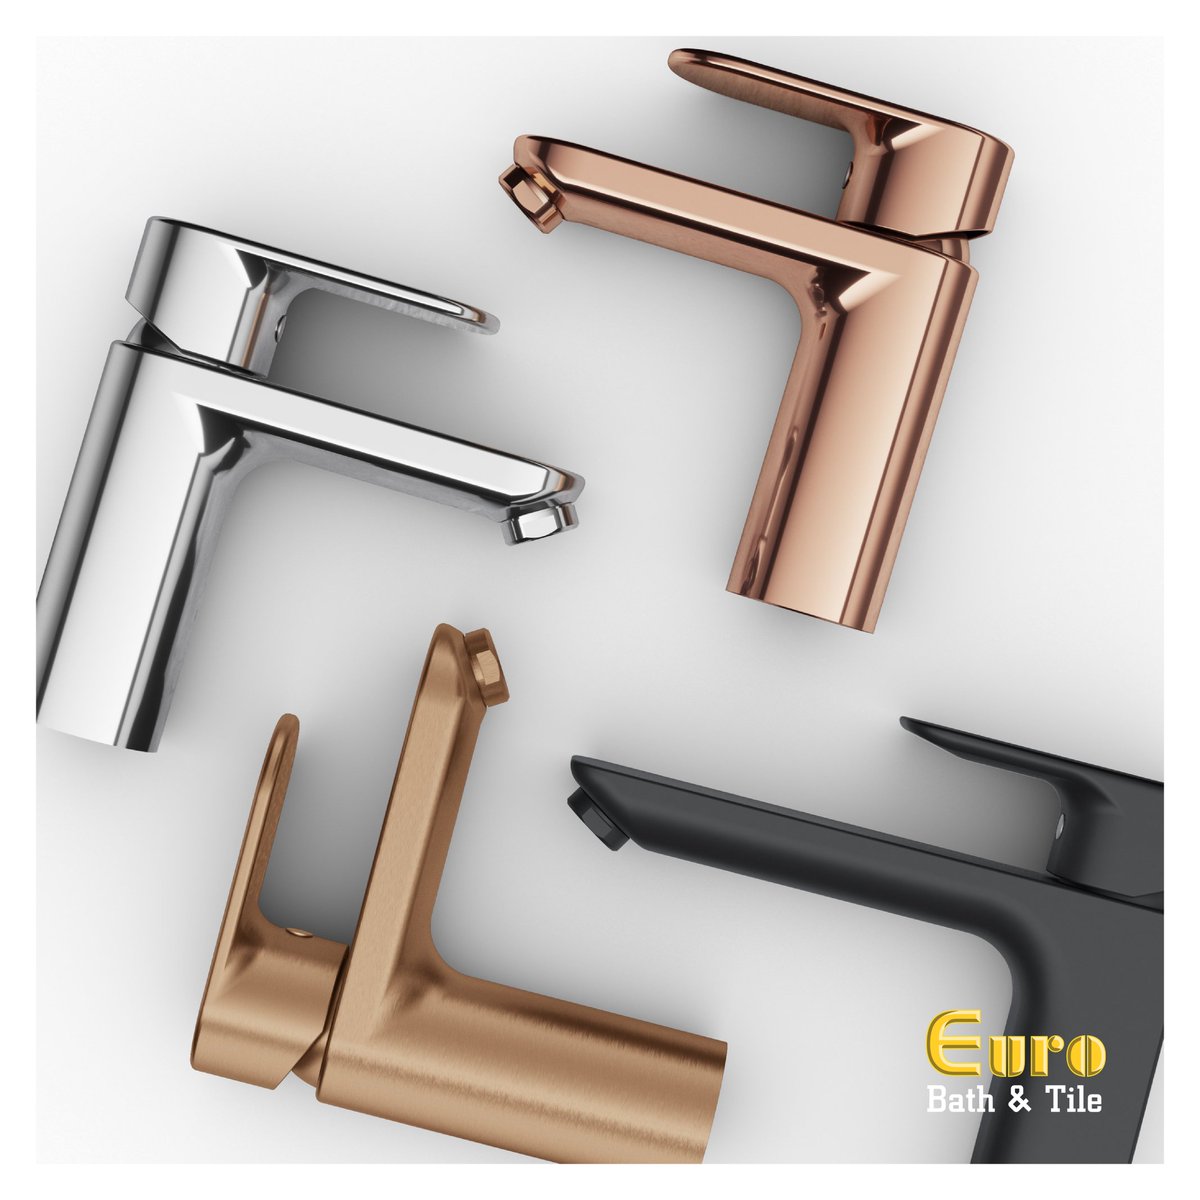 Turn on your style with taps that shine in every shade! Choose from an array of finishes including Chrome, Matte Black, Old Brass, and Gold. Your faucet, your vibe. #TapIntoStyle #FinishVariety